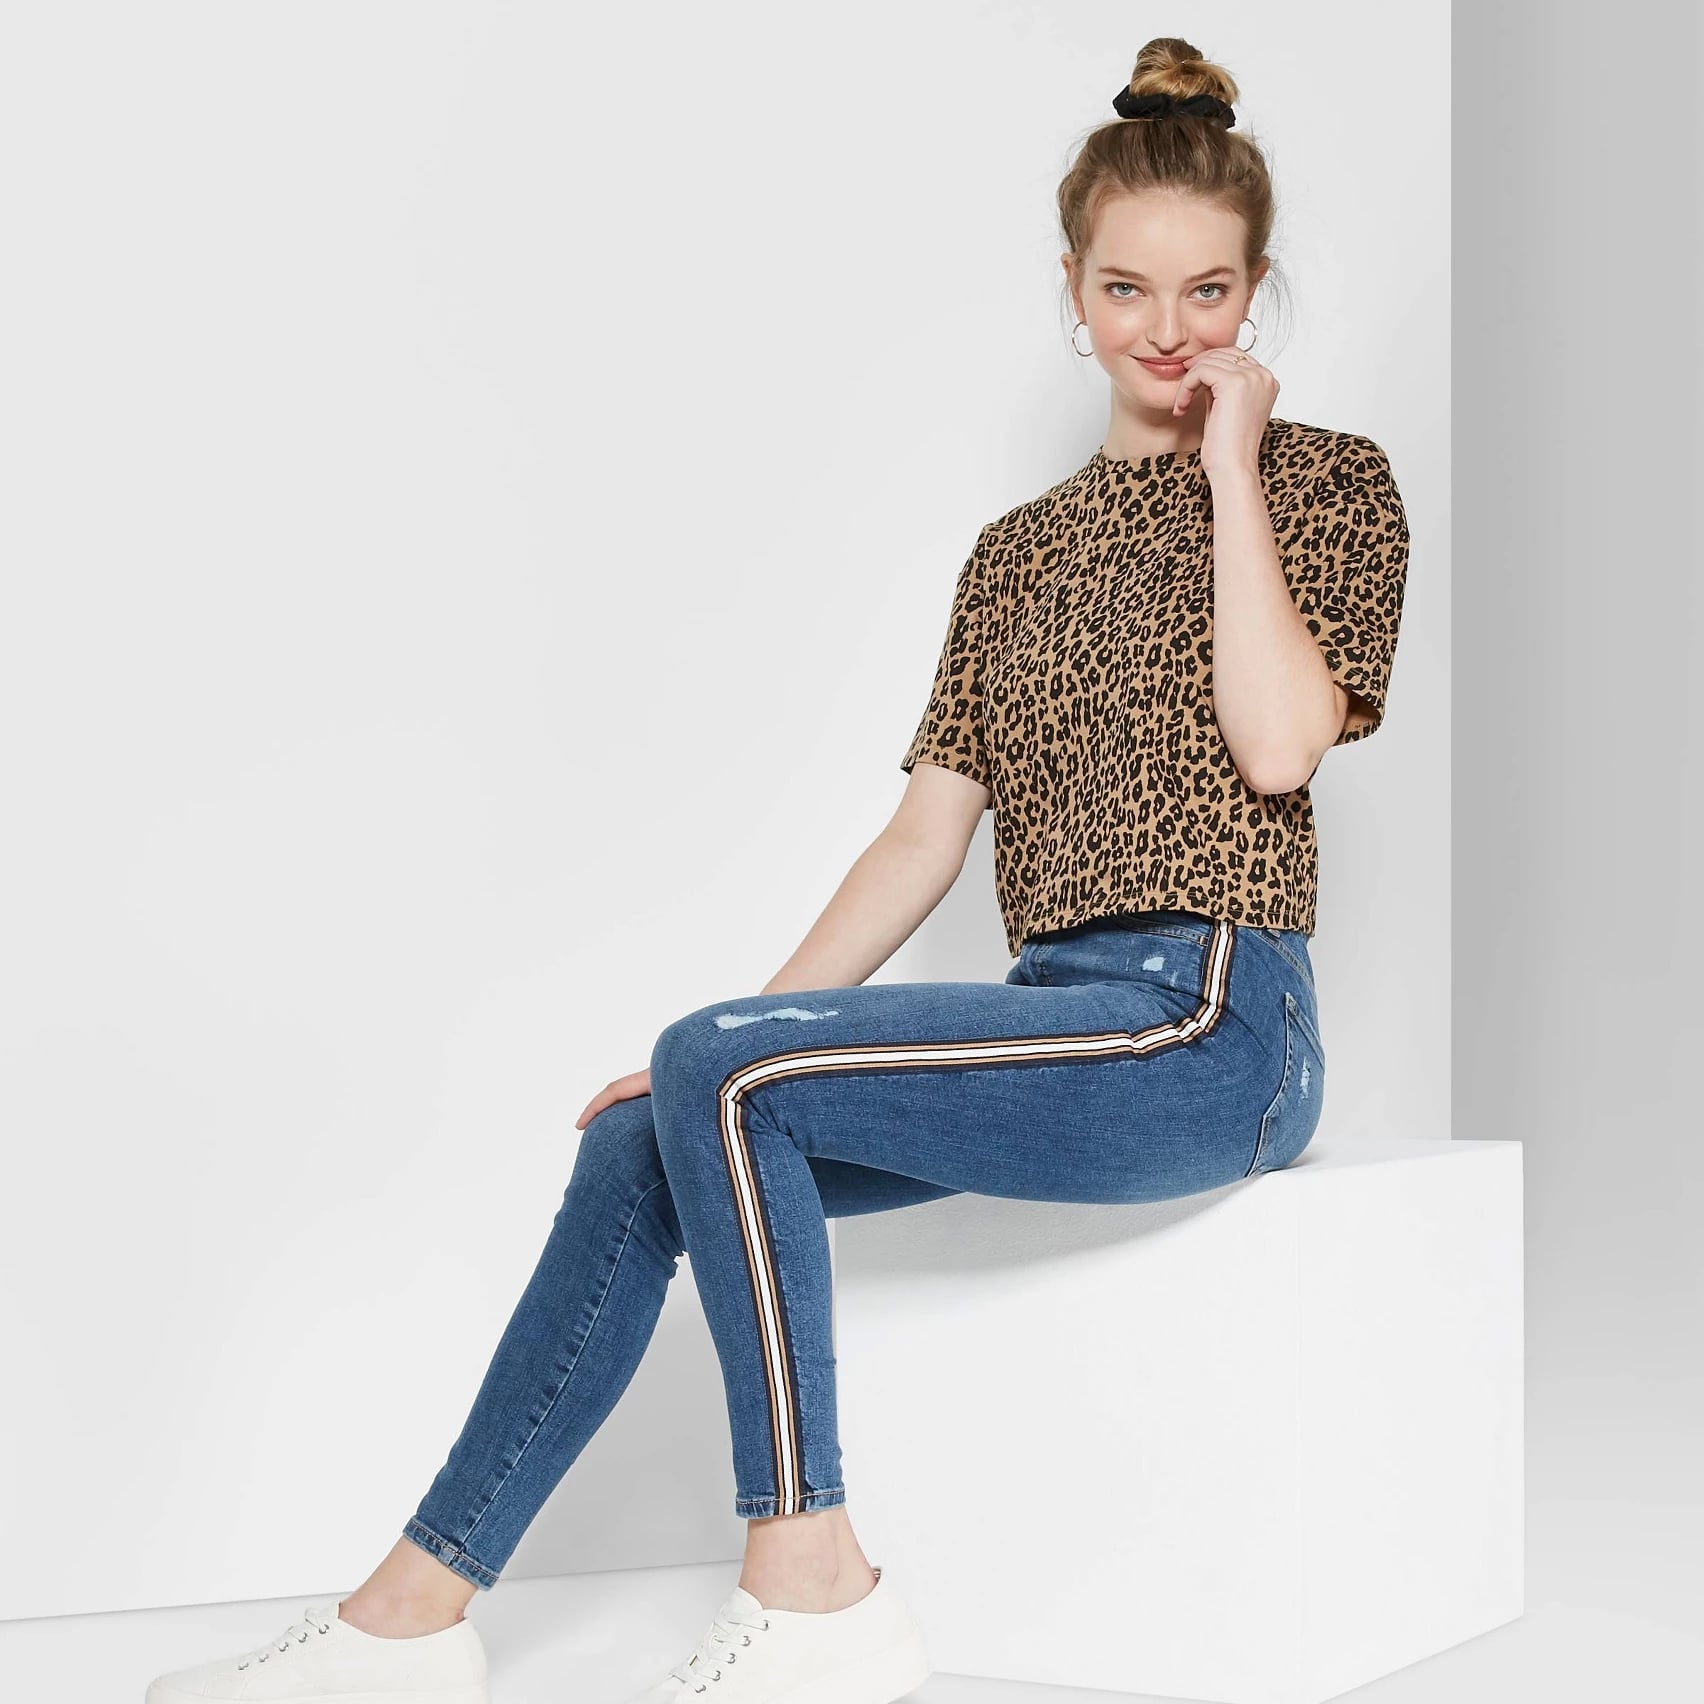 target fable jeans